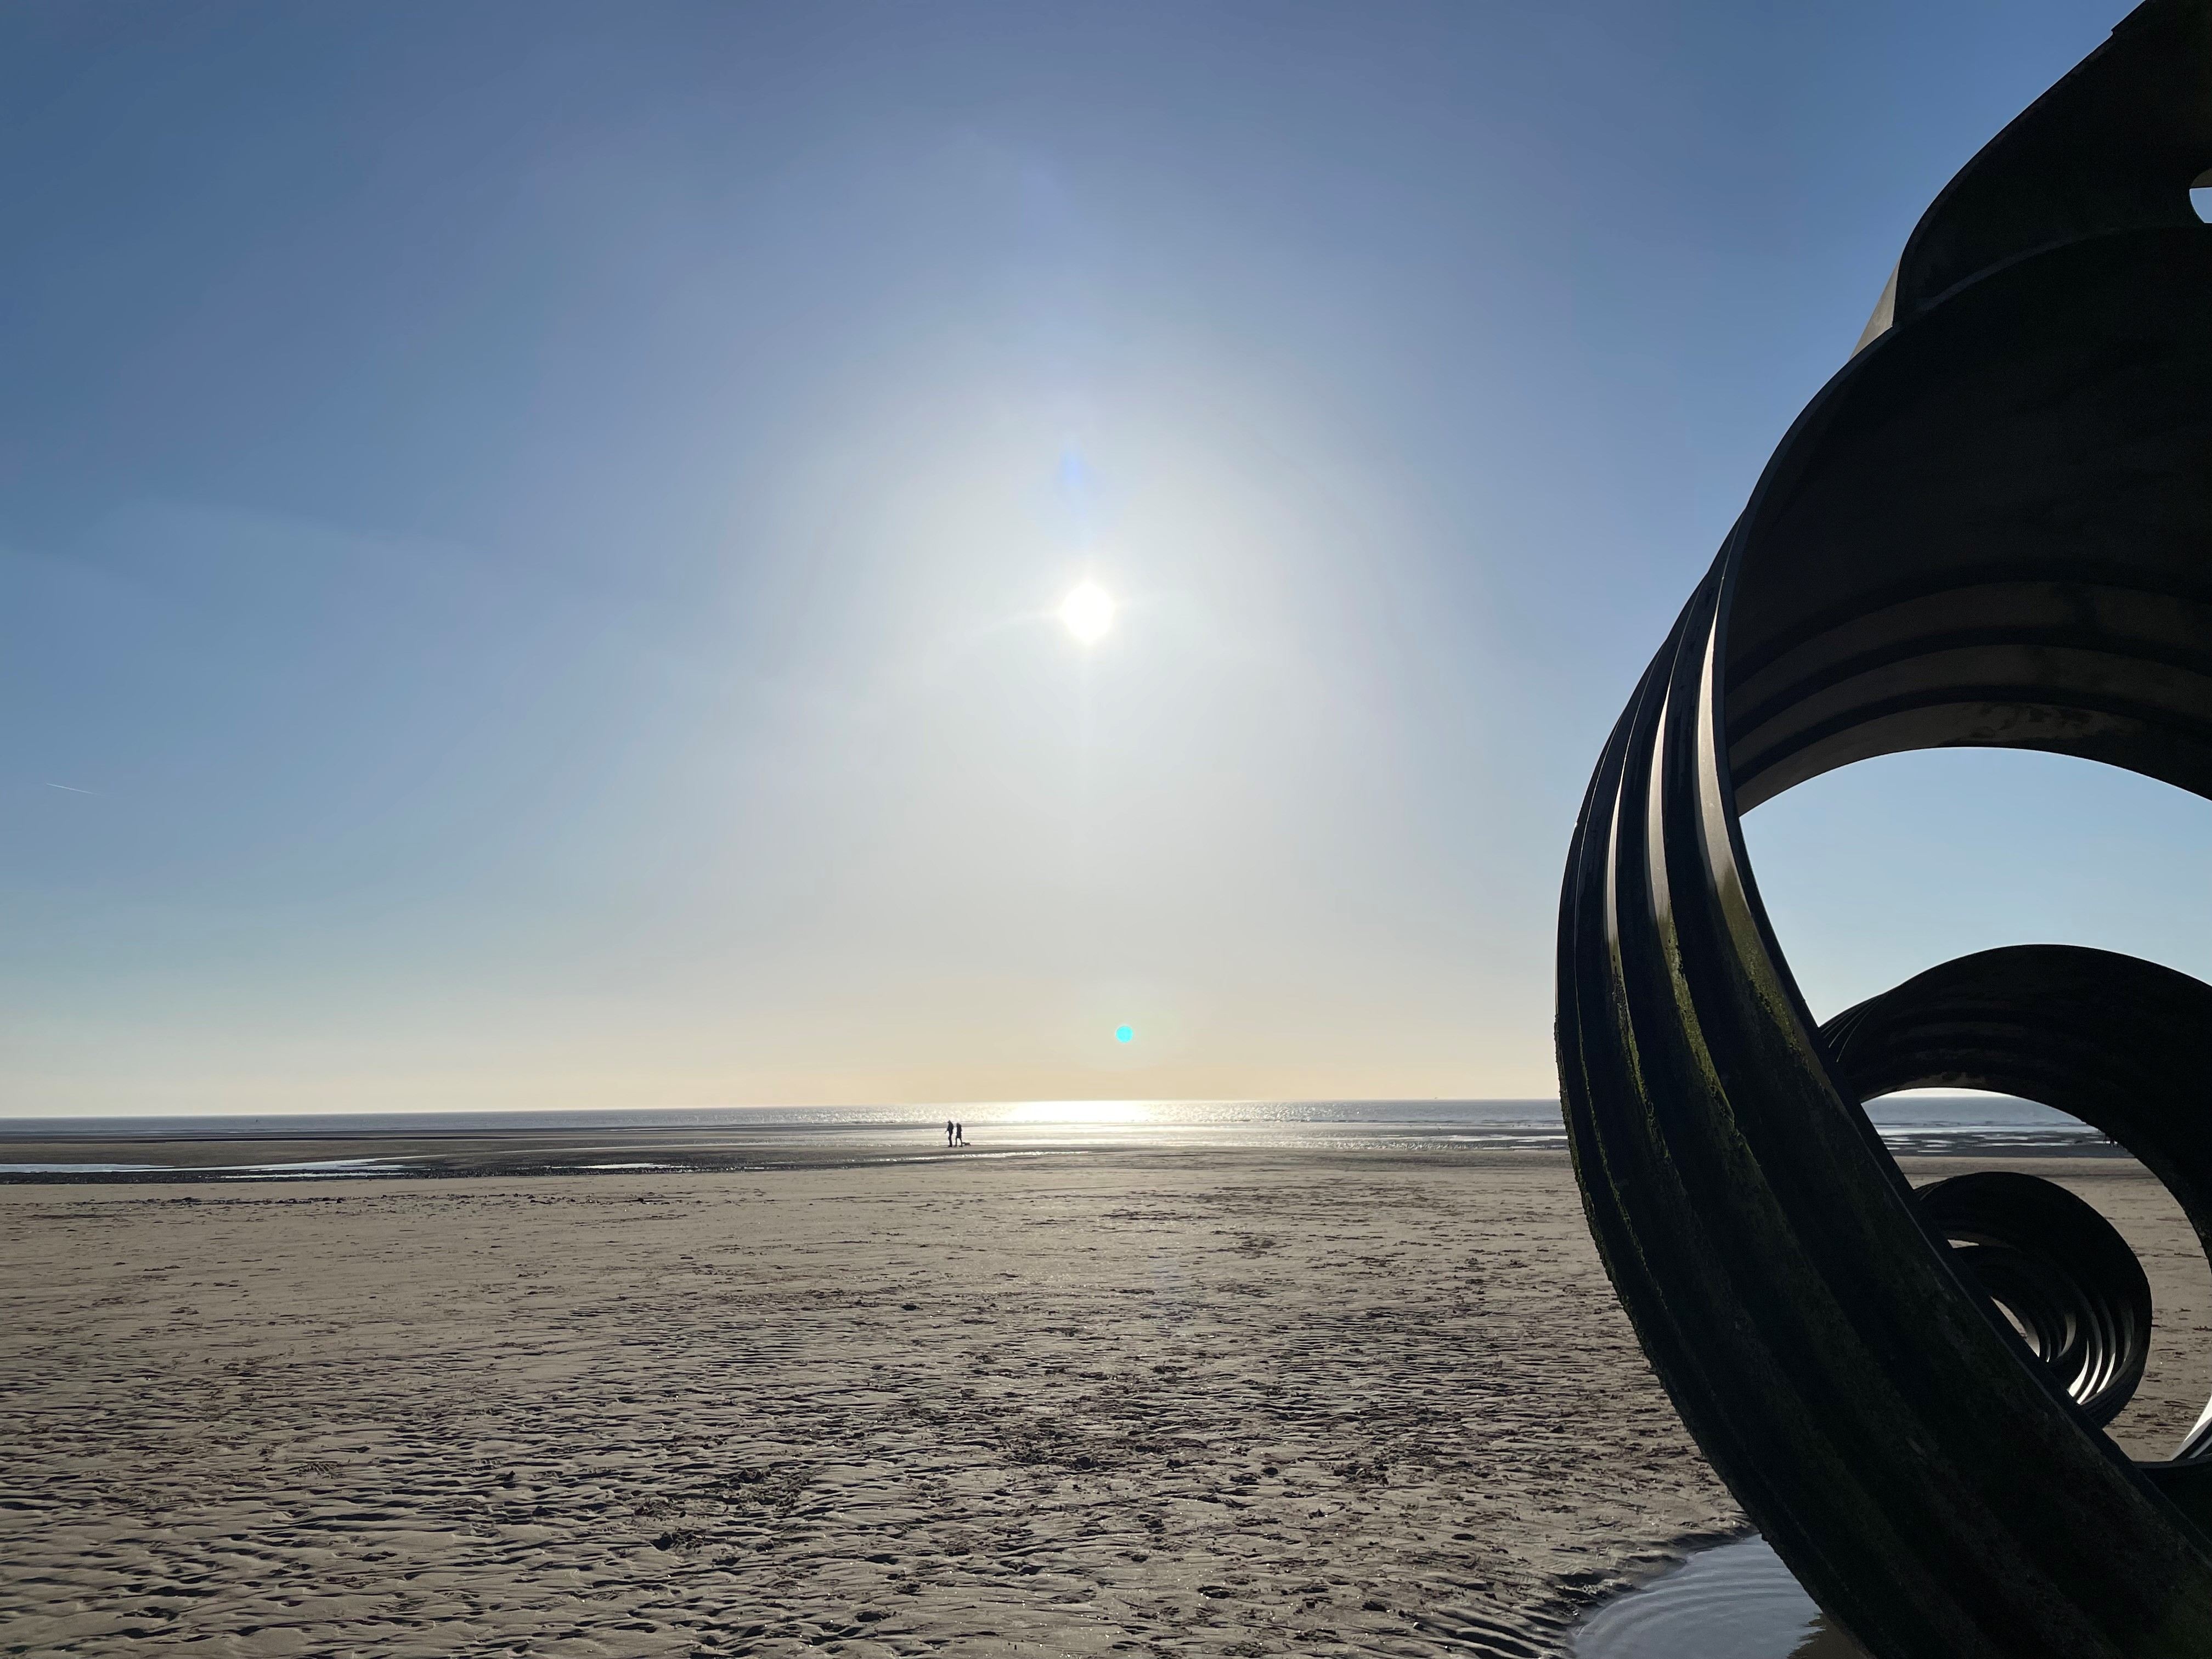 Cleveleys beach showing the sand, the sun setting and Mary's shell installation